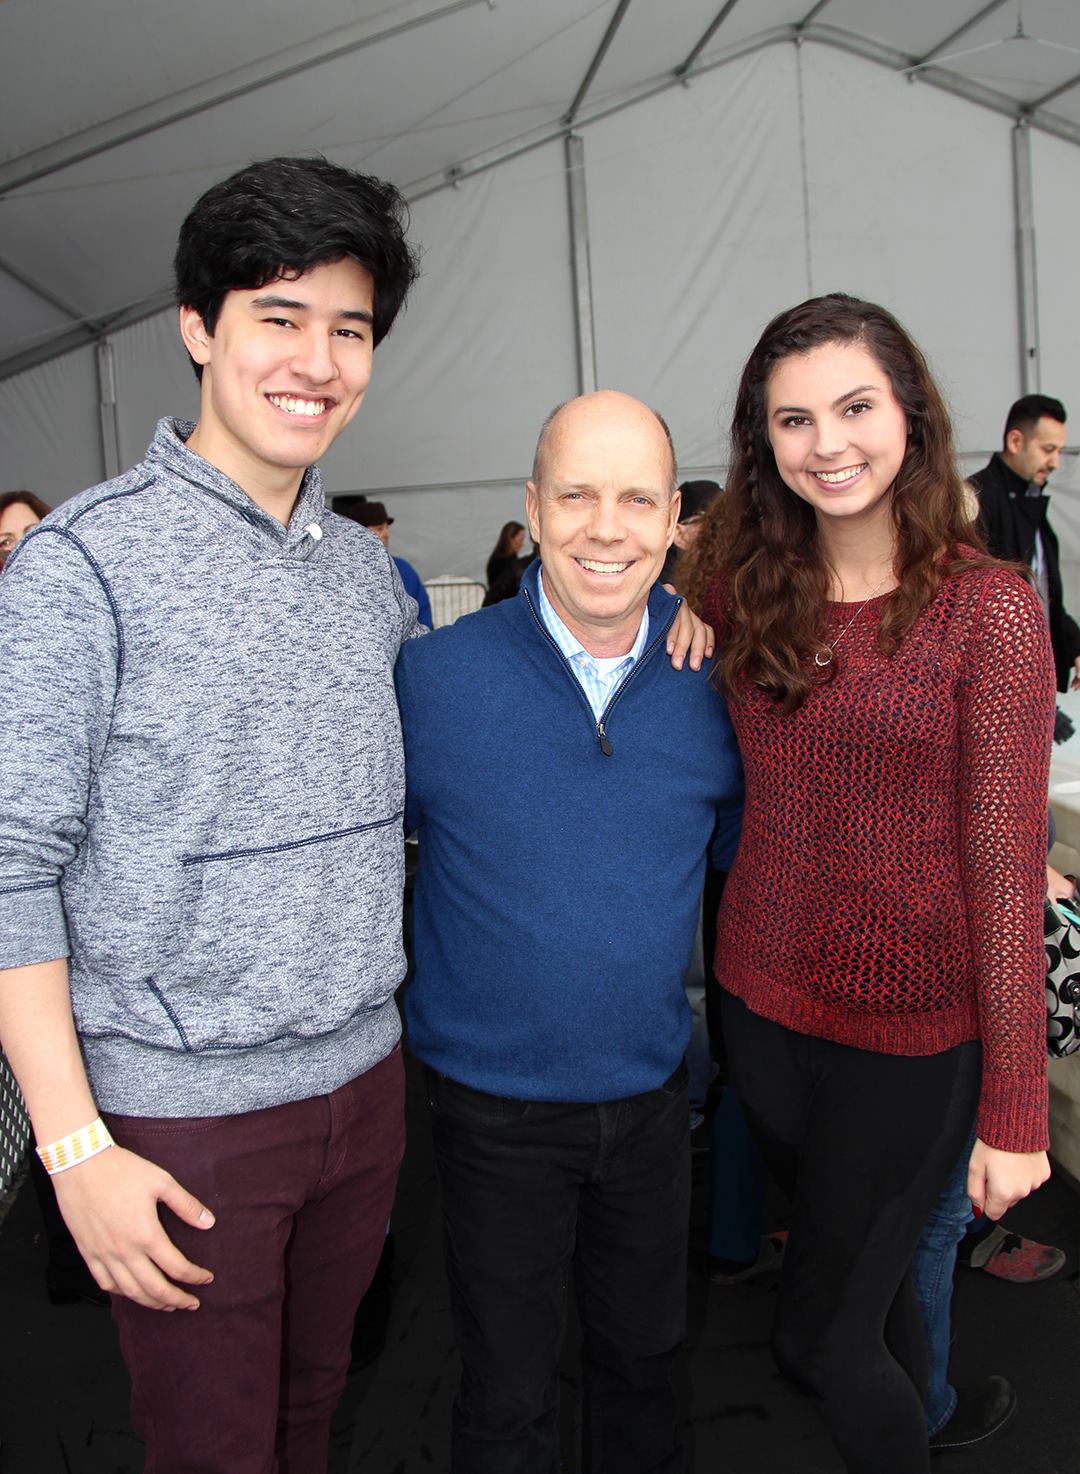 Paul Stevans with Olympic gold medalist figure skater Scott Hamilton and actress Taylor Hay at Sk8 to Elimin8 Cancer charity event in Woodland Hills, CA.